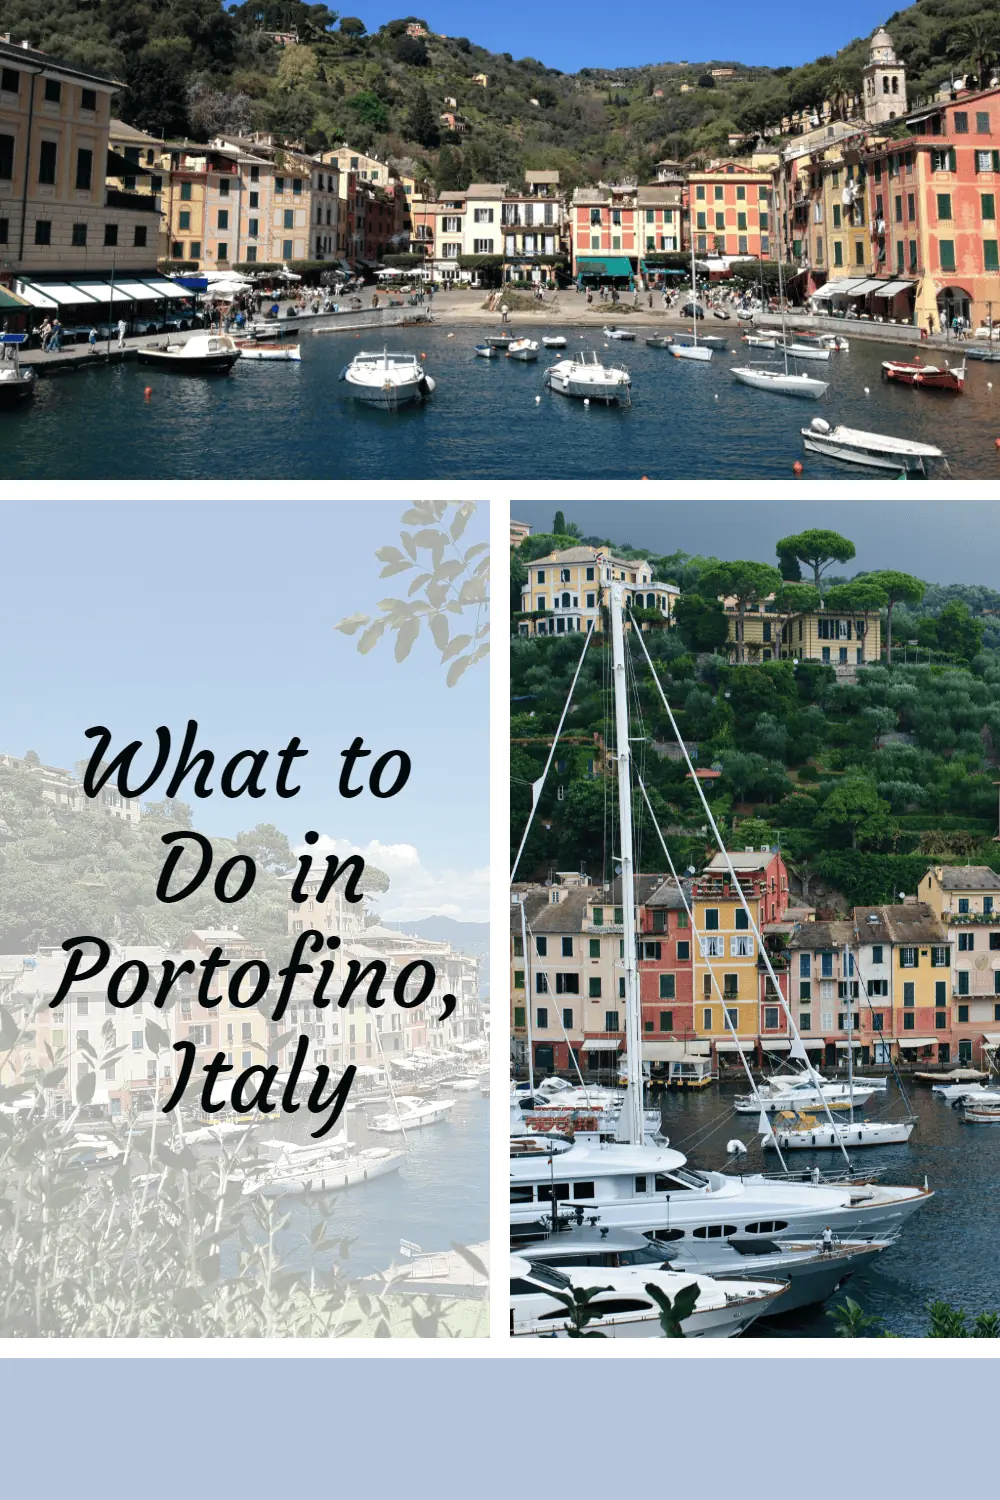 Read on for how to spend a day in the lovely, upscale town of Portofino, Italy as a cruise port or day trip. #PortofinoItaly